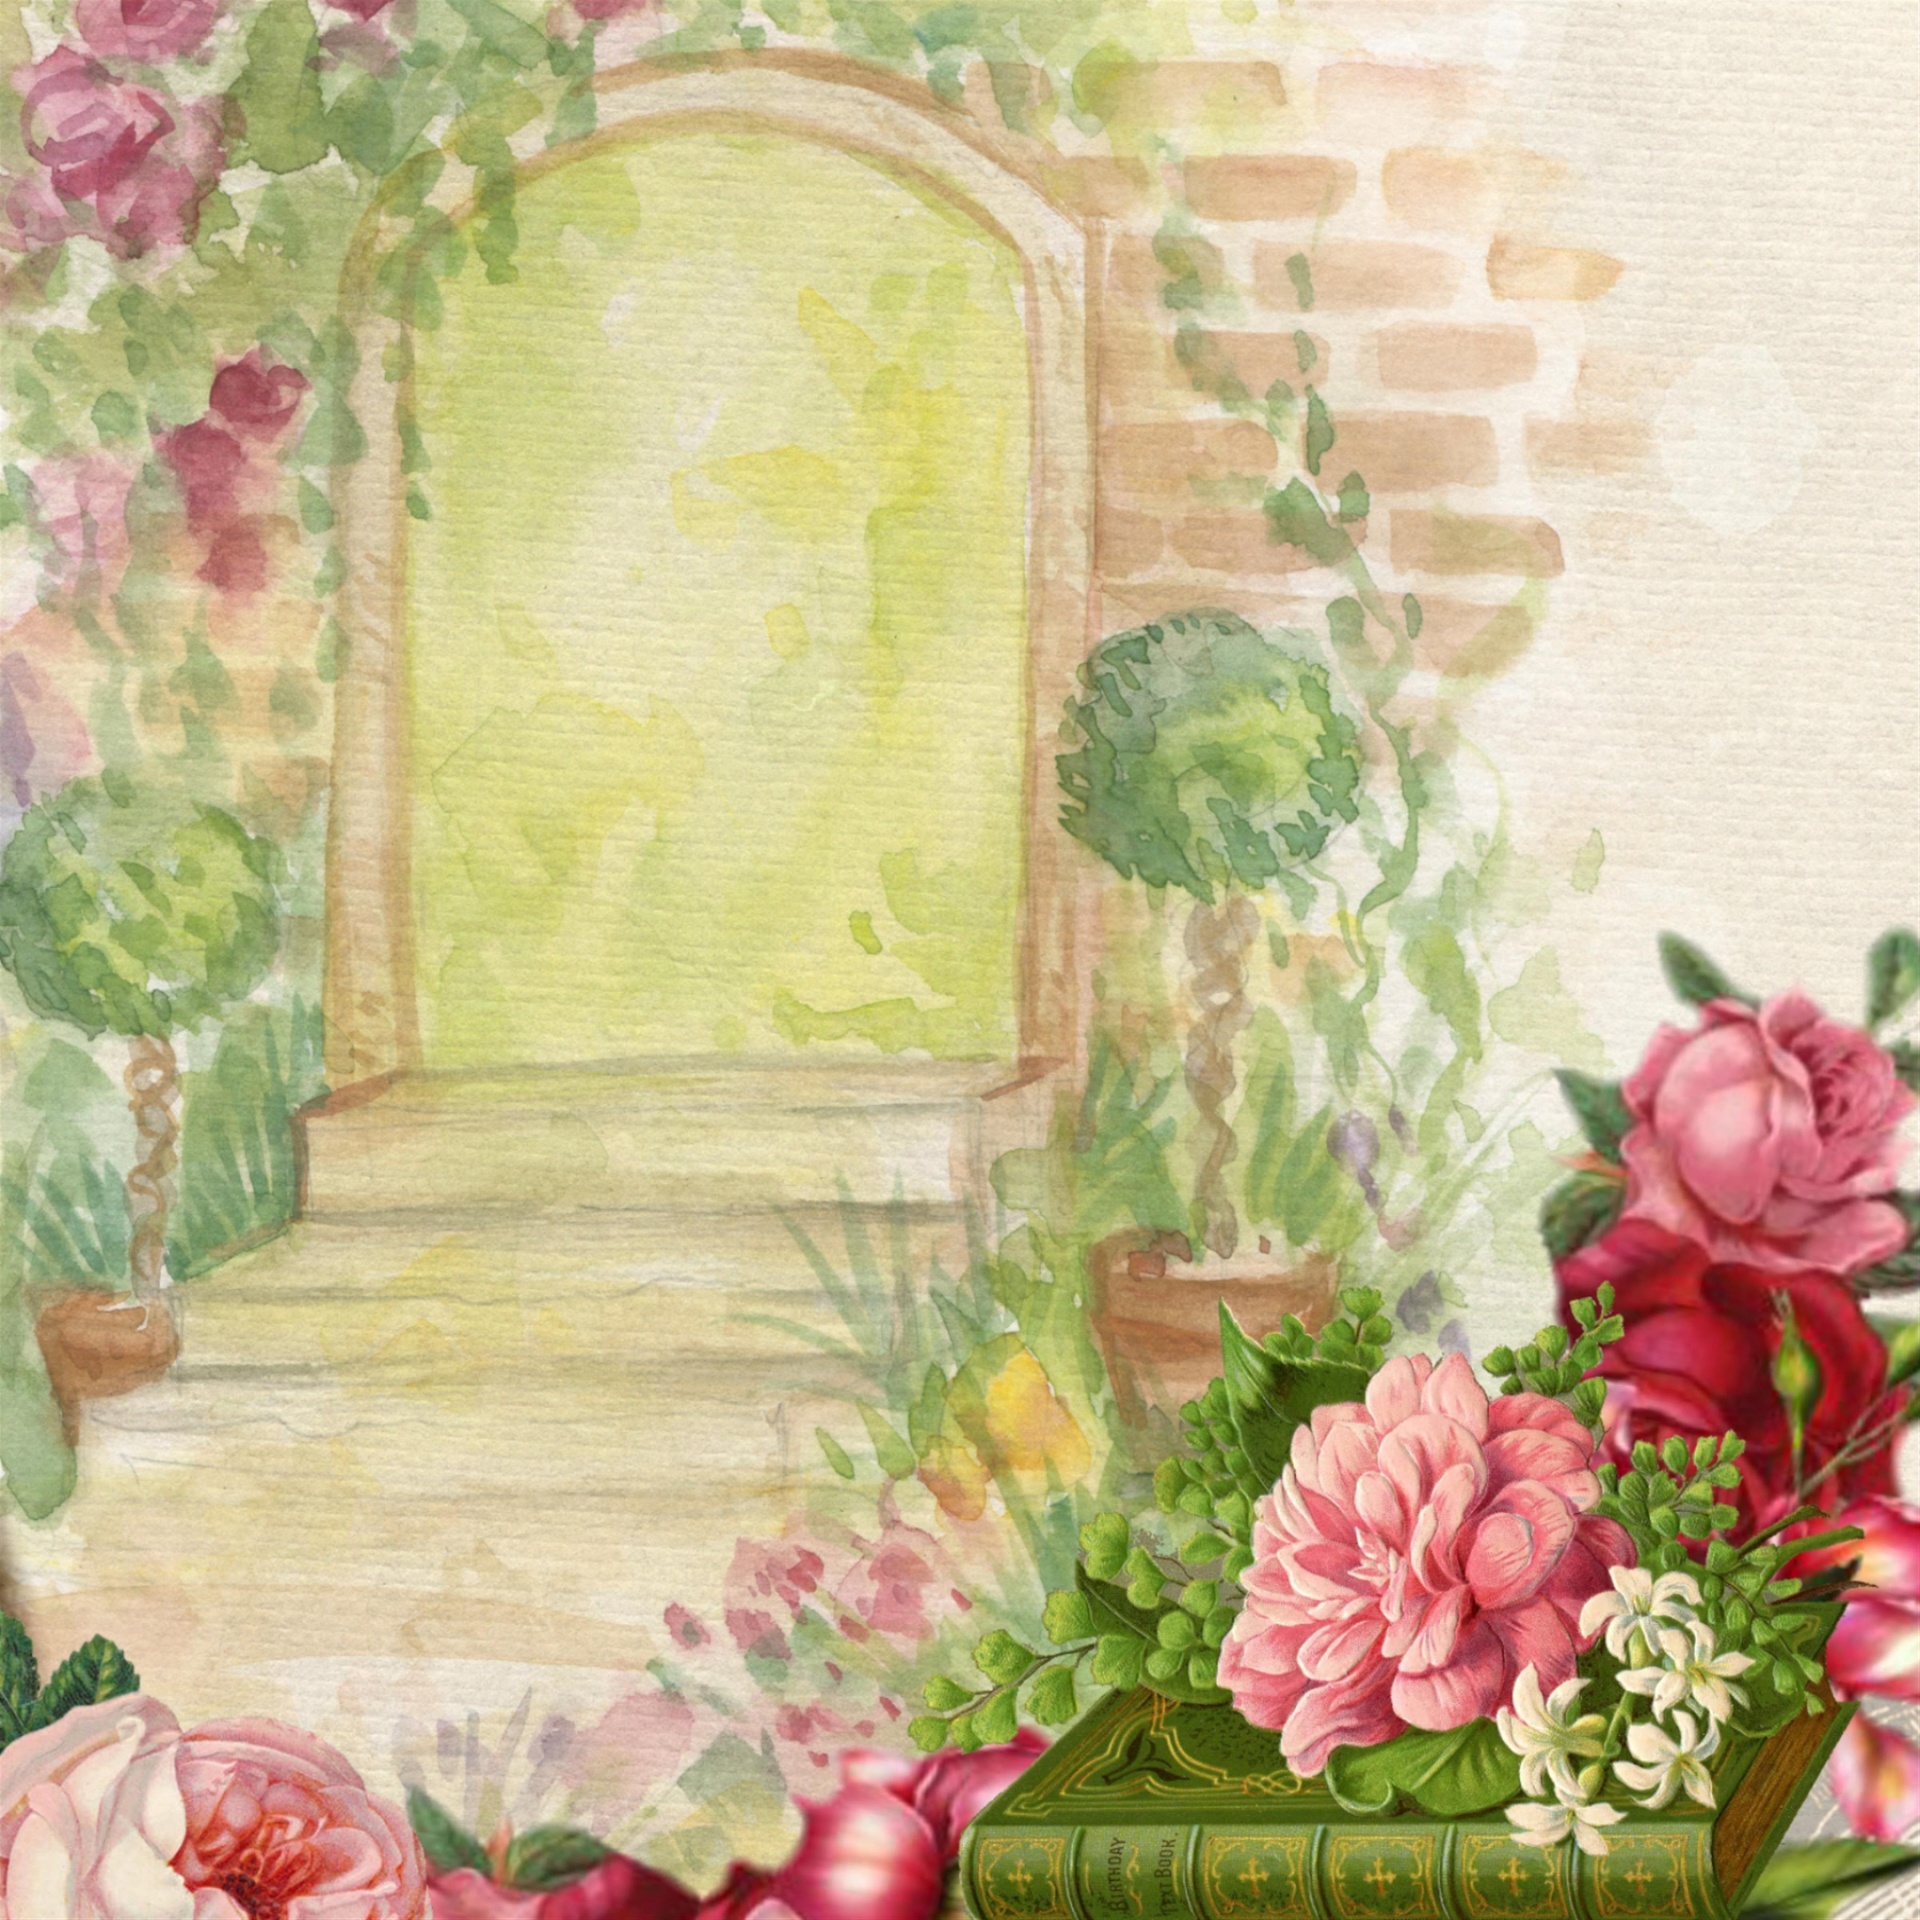 Background Watercolor Garden Flower Digital: Painting with pathway in a stunning floral colorful garden